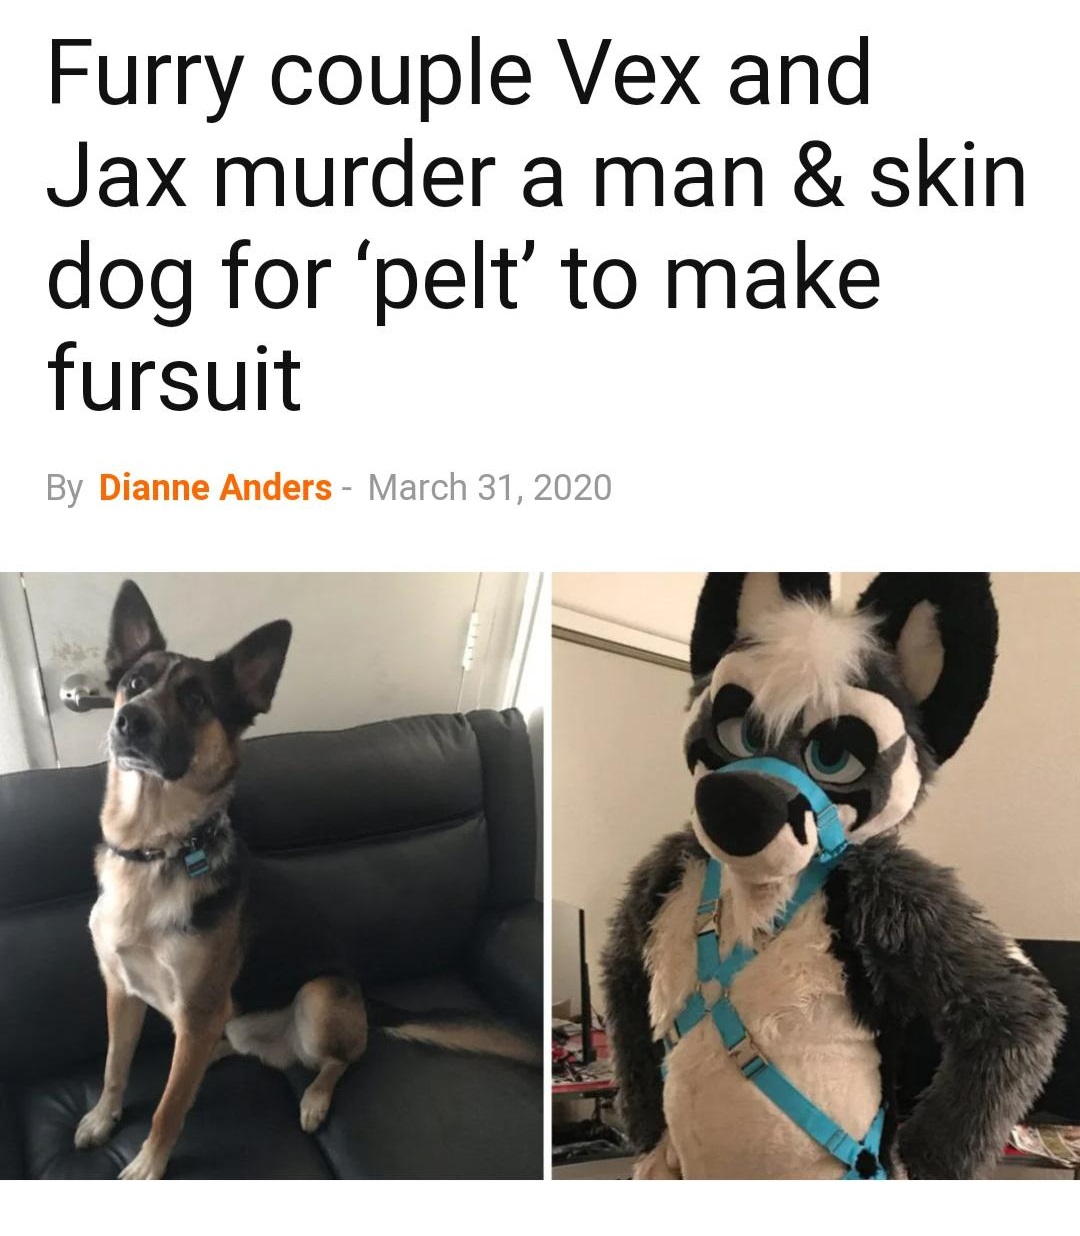 furry skins dog - Furry couple Vex and Jax murder a man & skin dog for 'pelt' to make fursuit By Dianne Anders